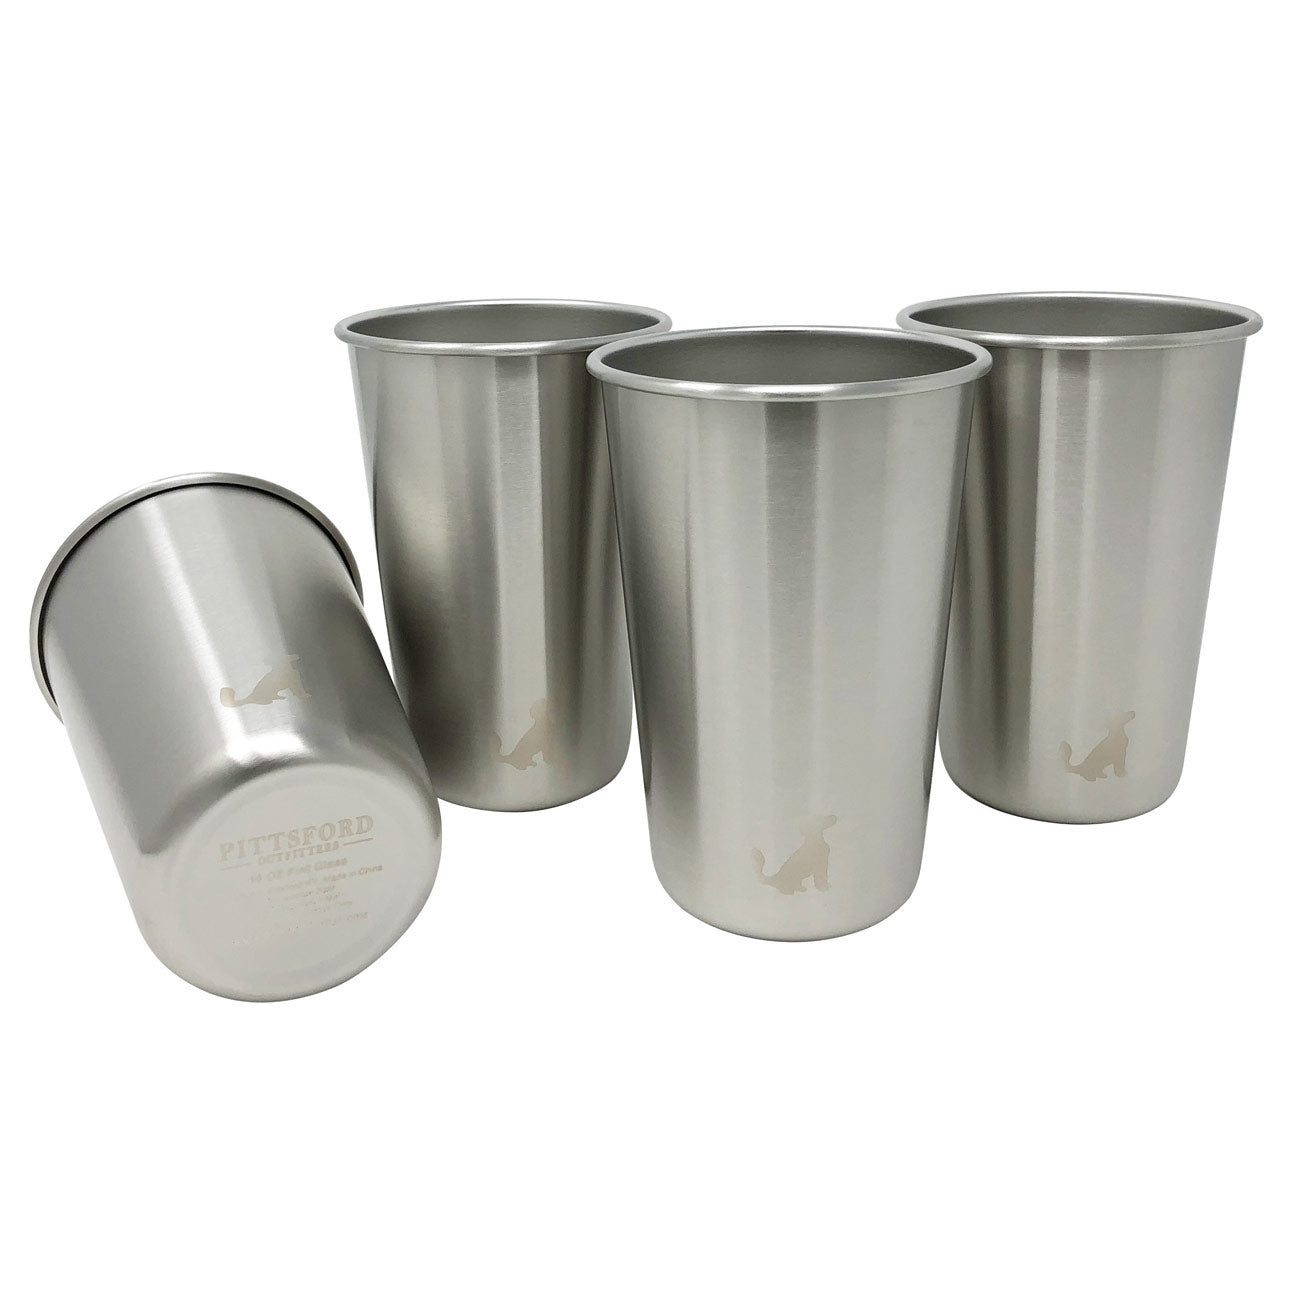 1 Premium Stainless Steel Cups 16oz Pint Cup Tumbler (4 Pack) By